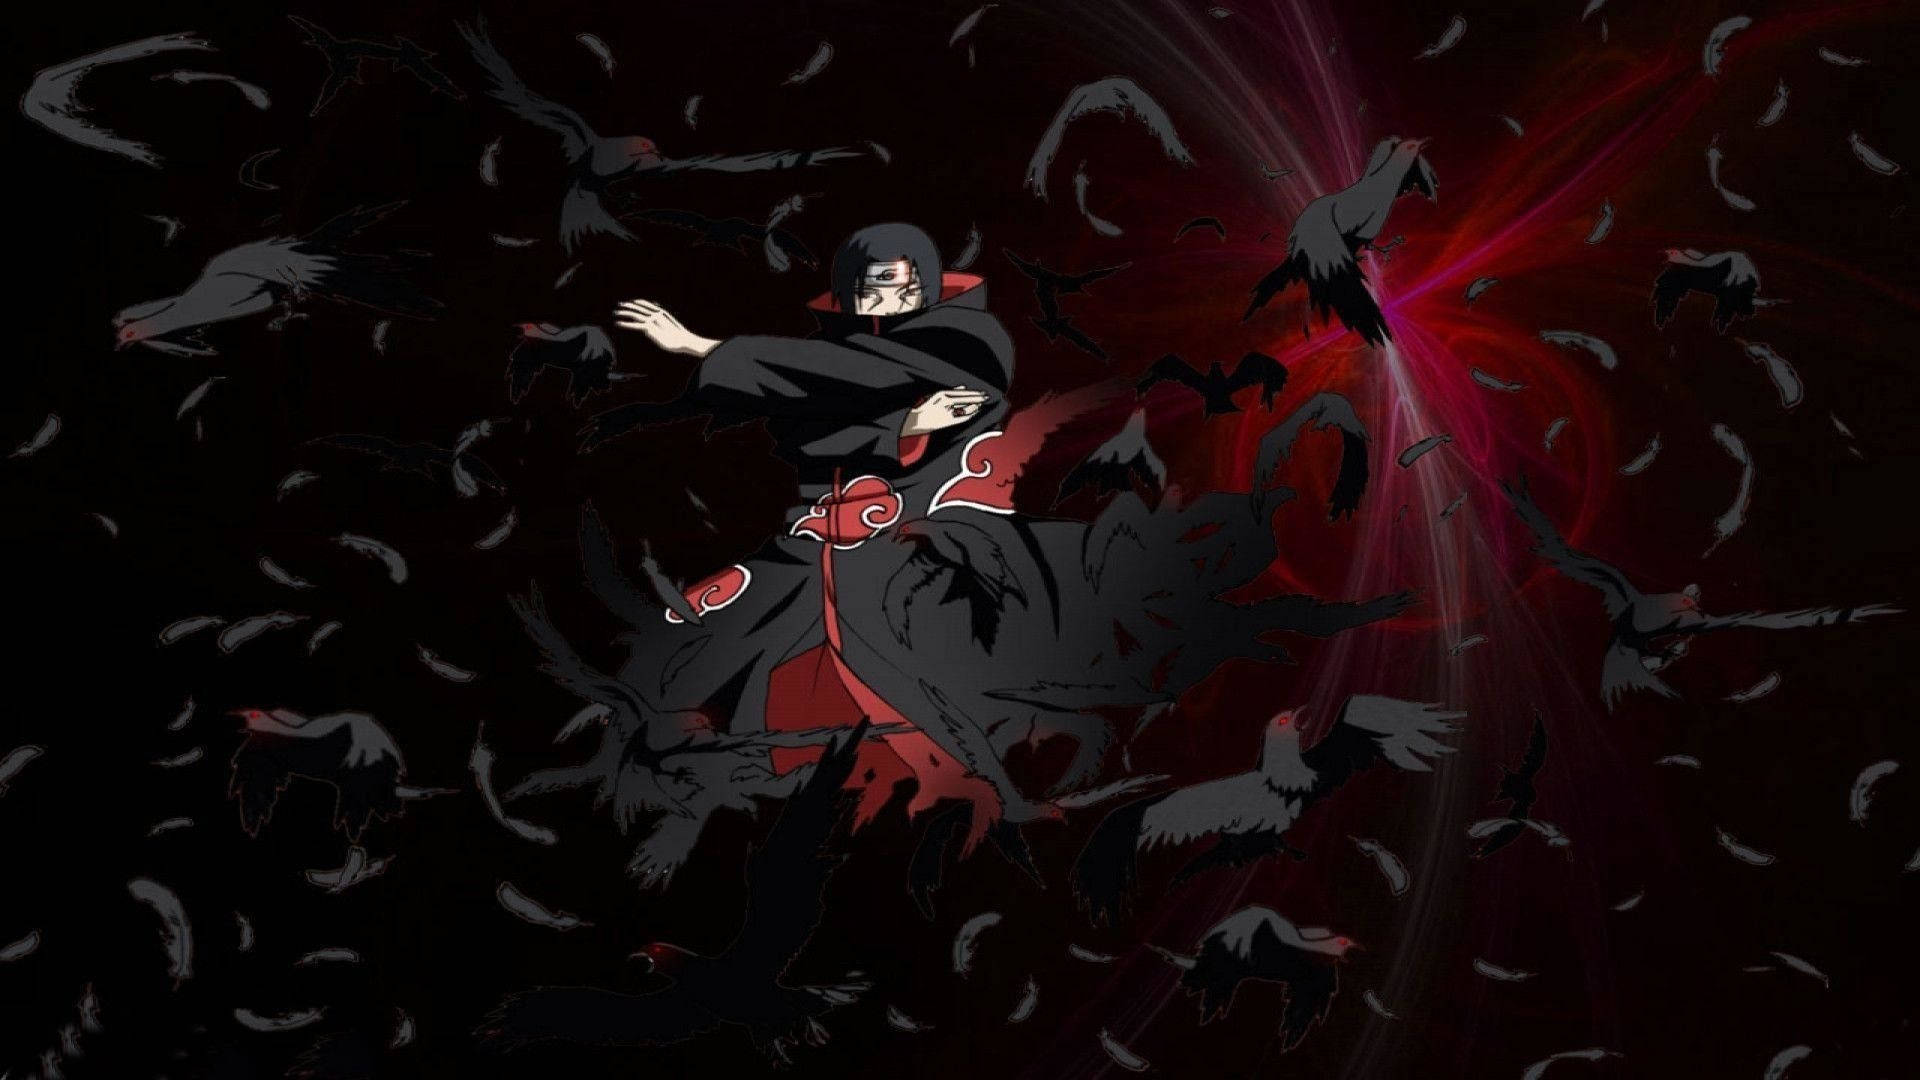 “the Tragedy Of Shisui Uchiha And His Unwavering Devotion To Protecting His Allies” Background